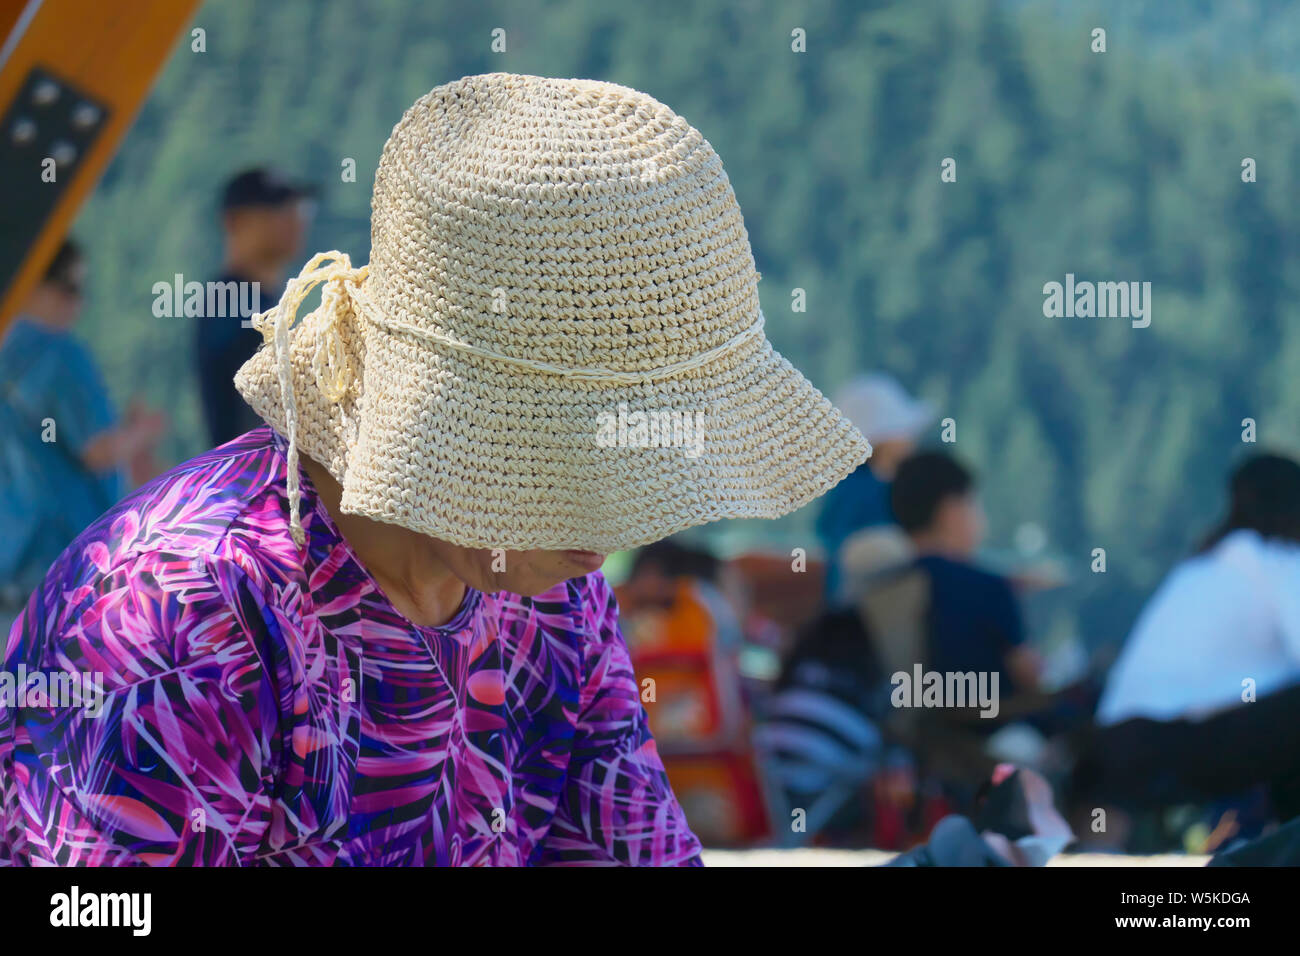 A close-up view of a straw hat on a woman who is wearing a bright purple and pink blouse and looking down. Stock Photo